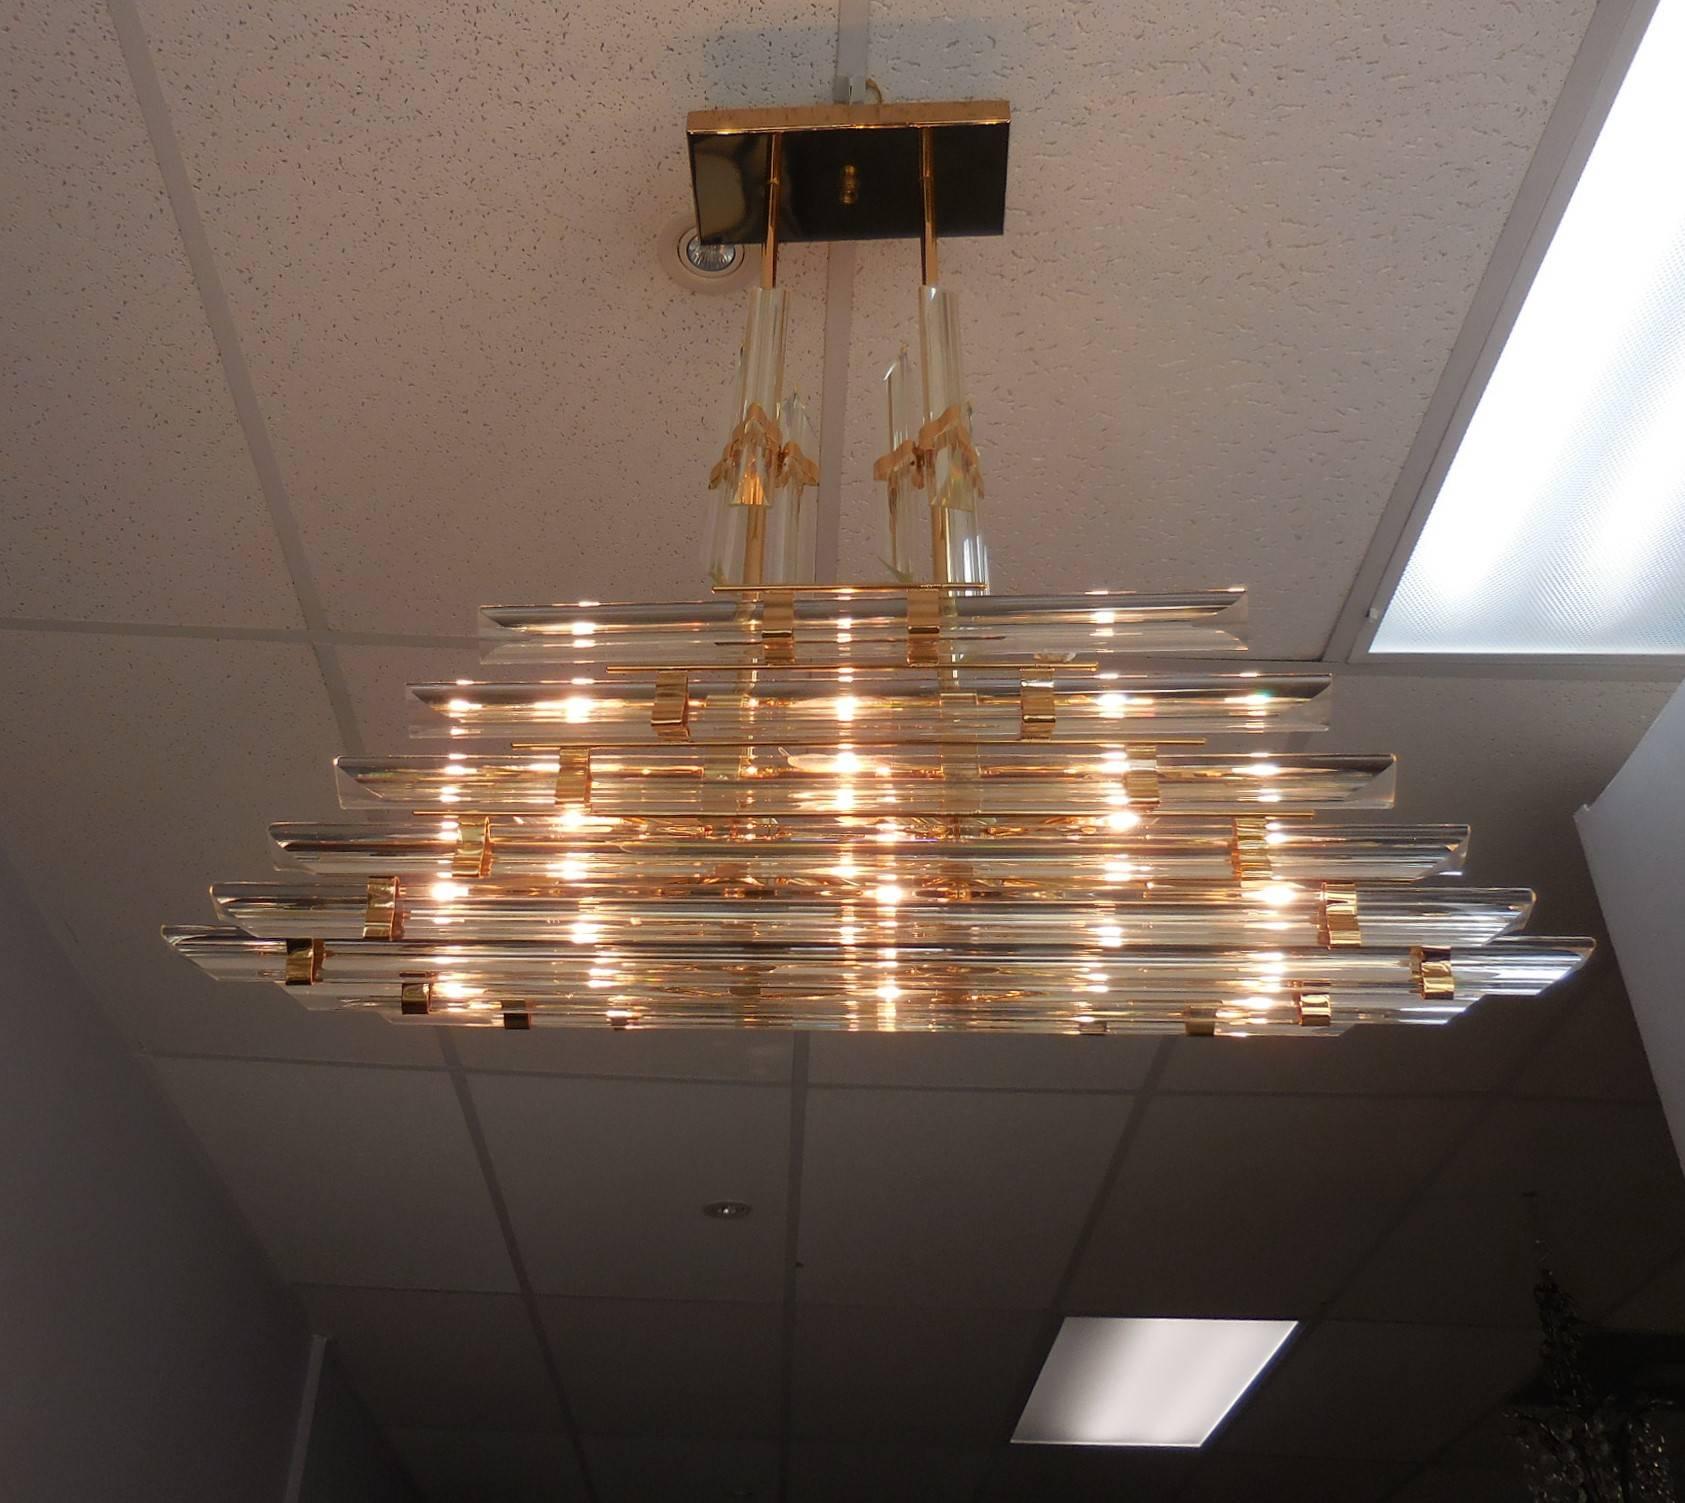 An unusual chandelier. The frame is gold plated, rectangular ceiling plate. The glass rods are of different lengths. Takes eight regular chandelier bulbs. It is a piece of jewelry hanging from the ceiling.